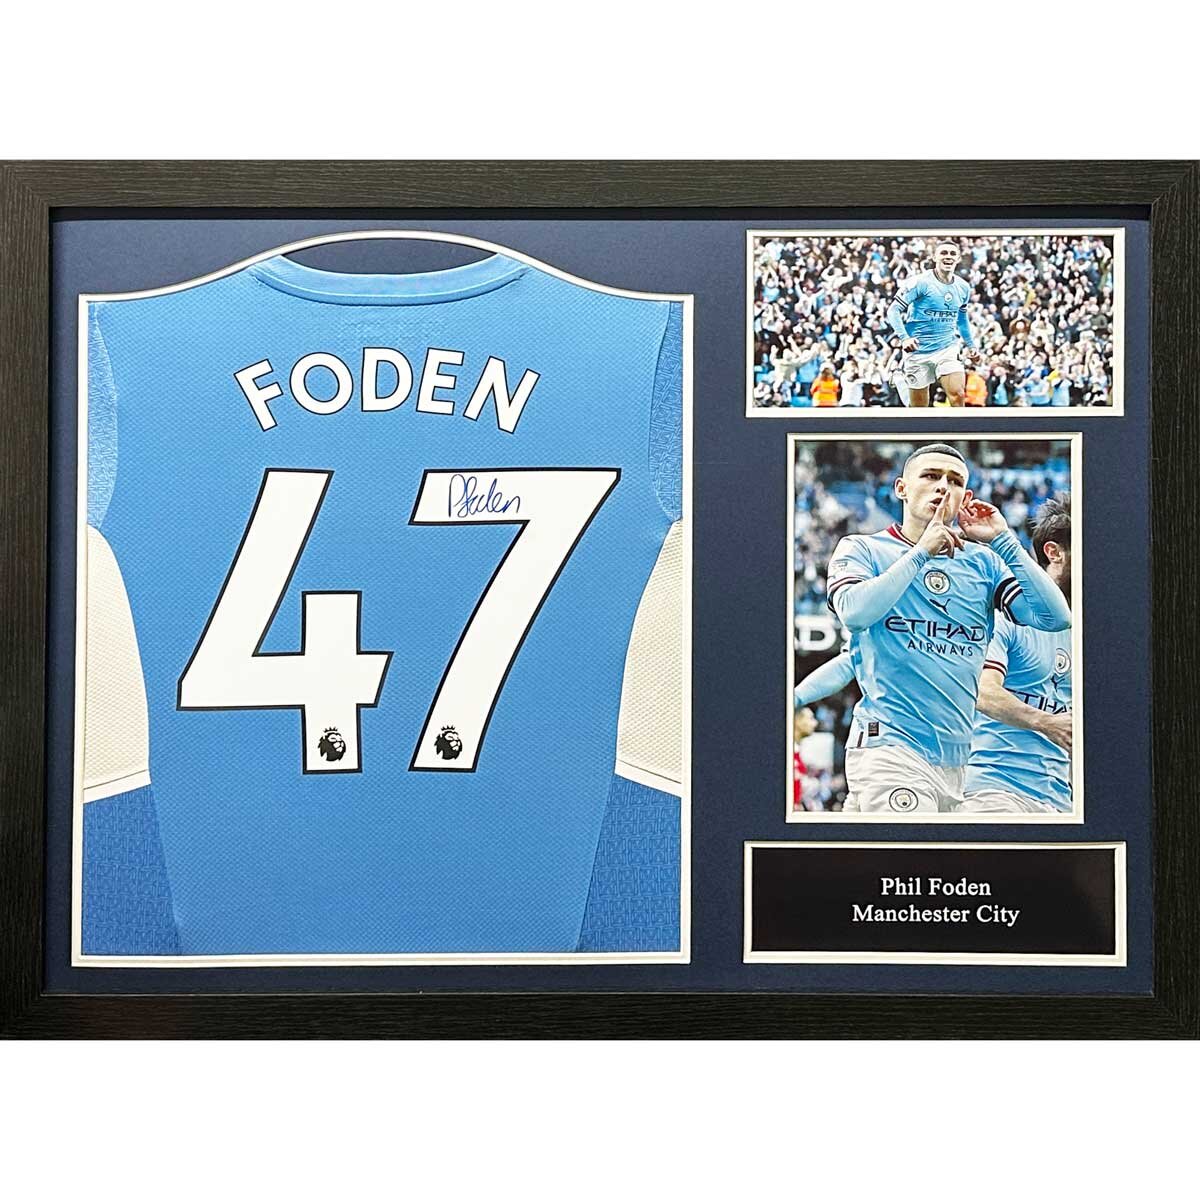 Phil Foden signed shirt